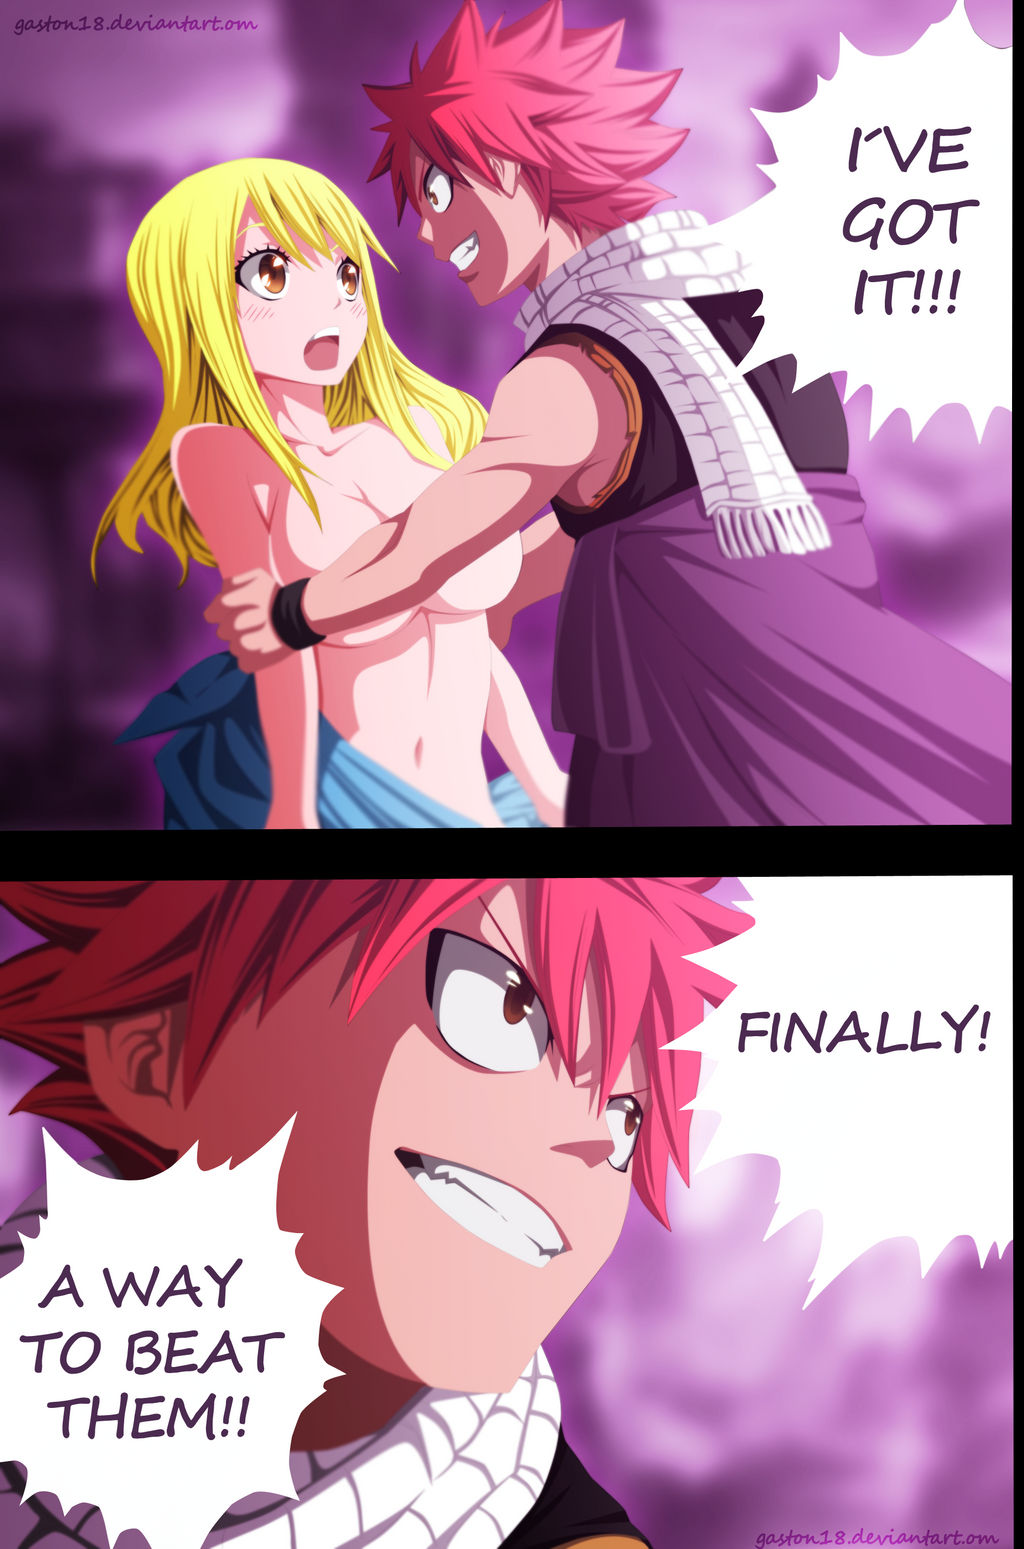 fairy tail new opening 18 by natsu159753 on DeviantArt